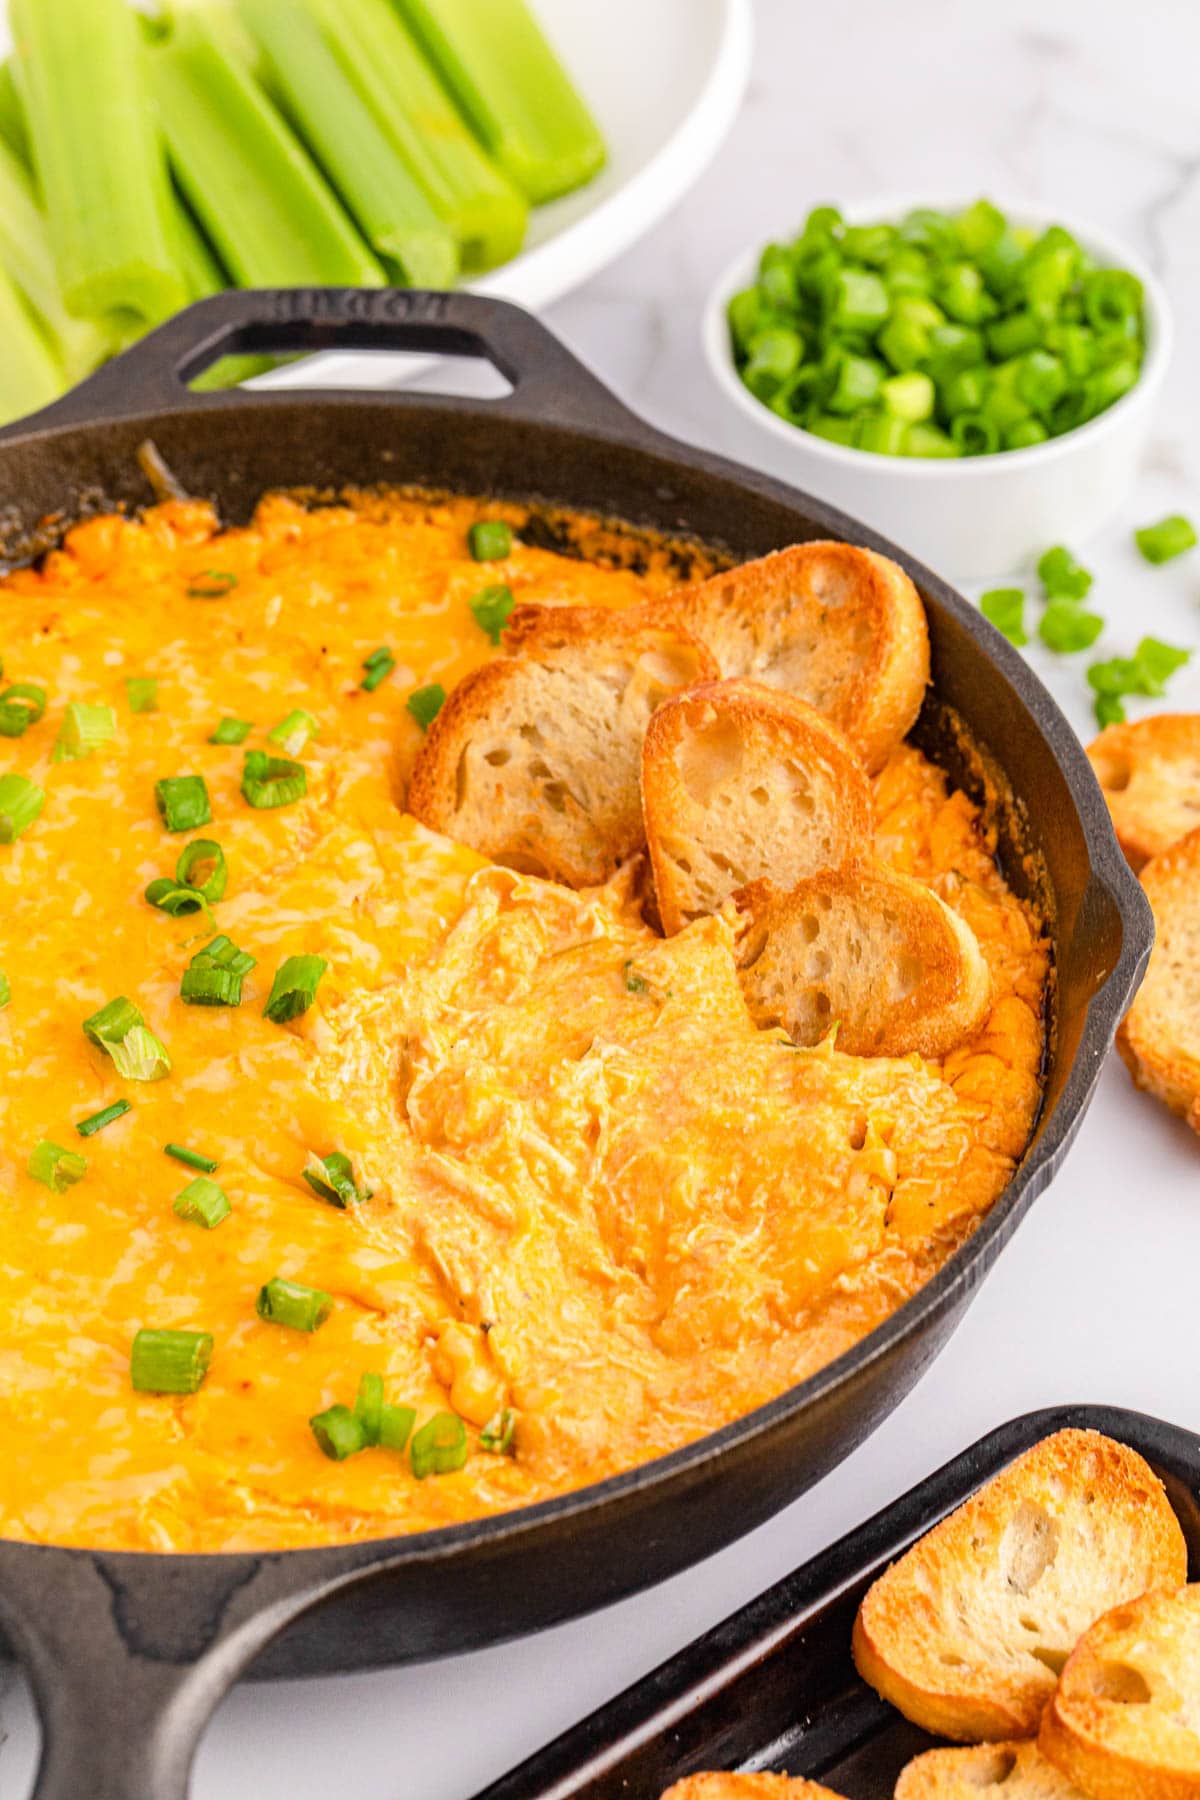 Buffalo chicken dip with toasted bread dipped in it